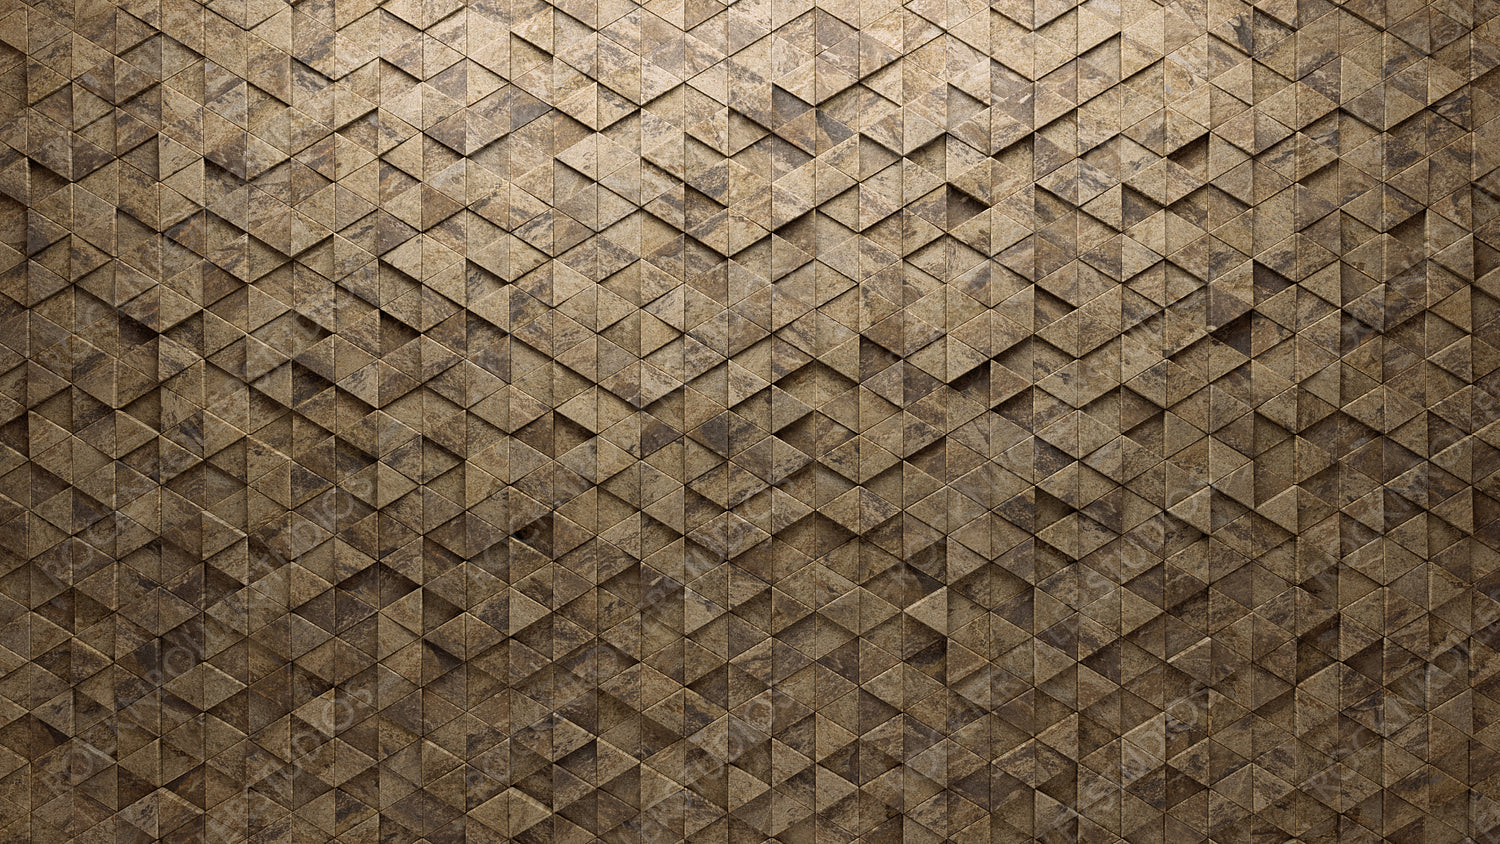 Triangular, Semigloss Mosaic Tiles arranged in the shape of a wall. Polished, Natural Stone, Bricks stacked to create a 3D block background. 3D Render